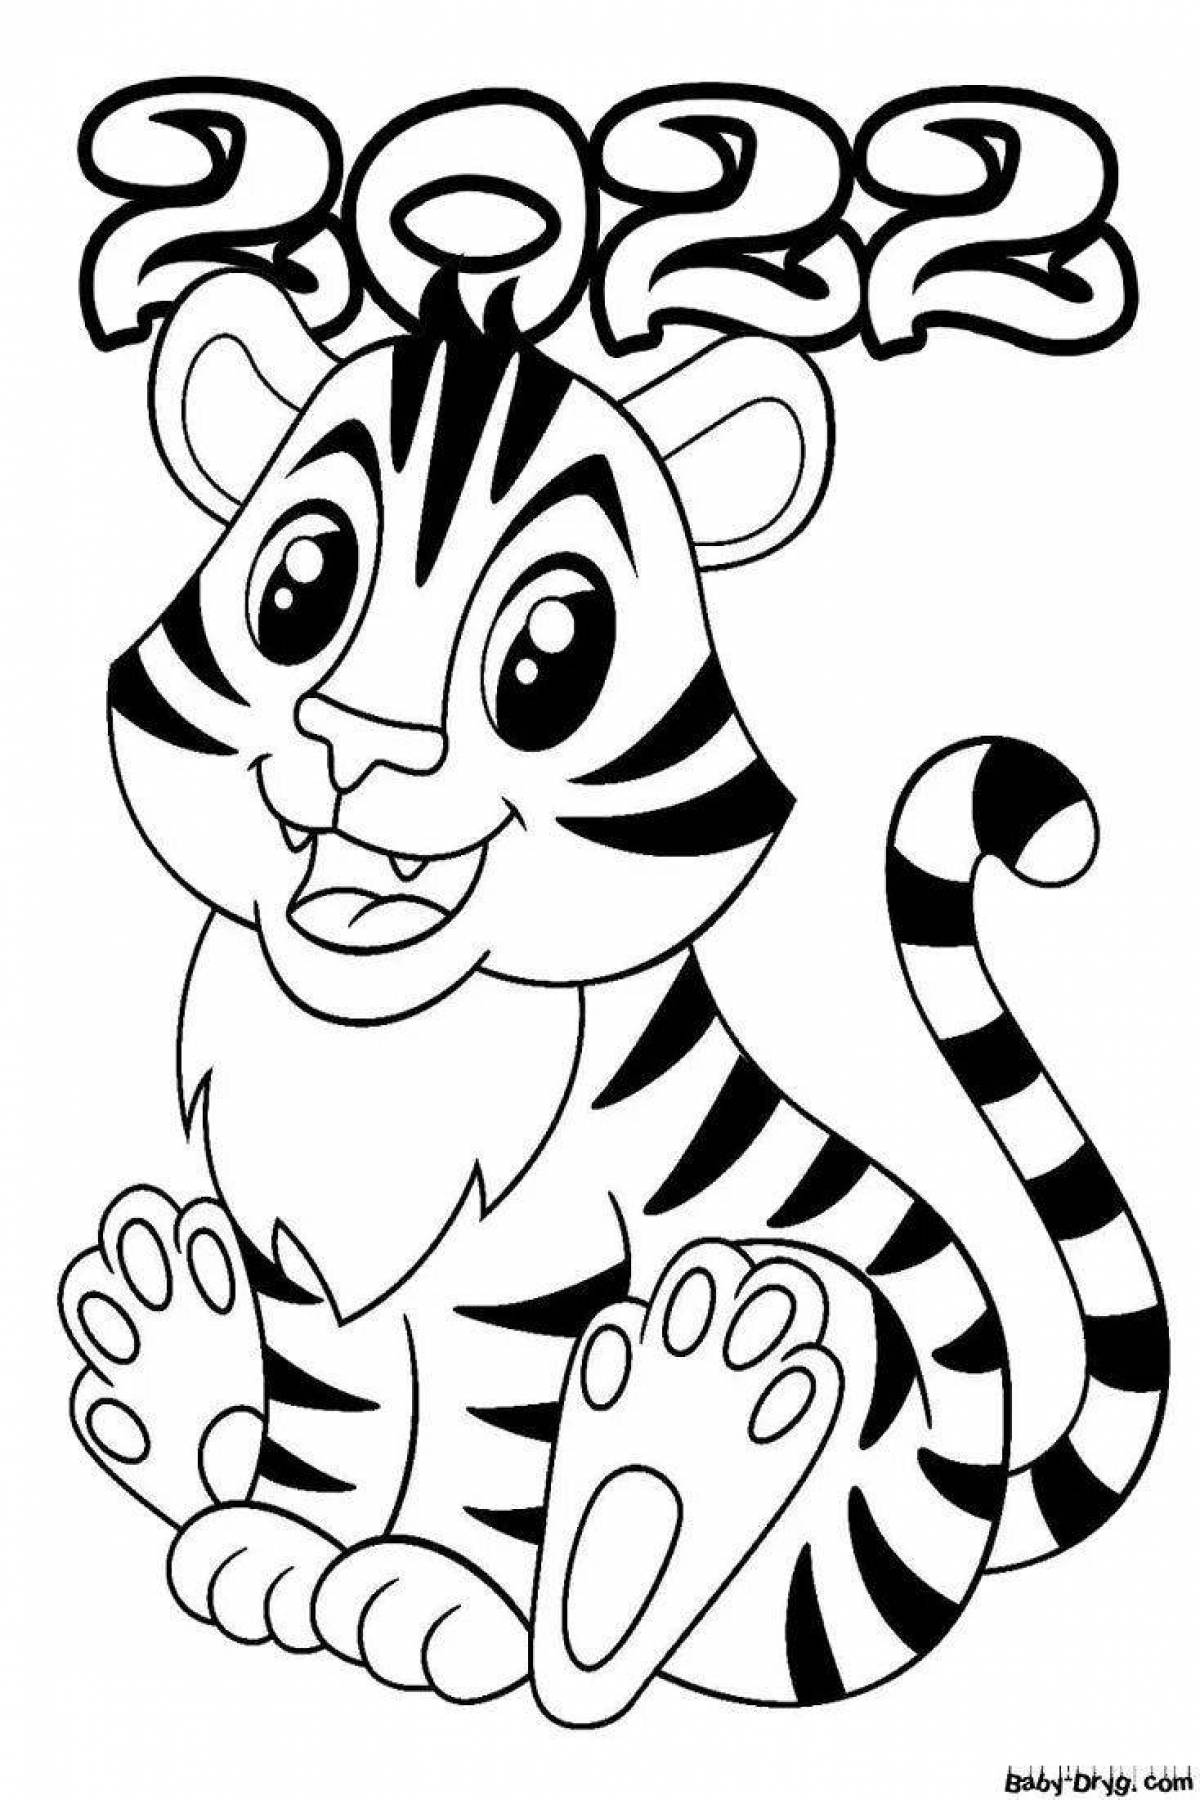 Naughty tiger coloring for girls